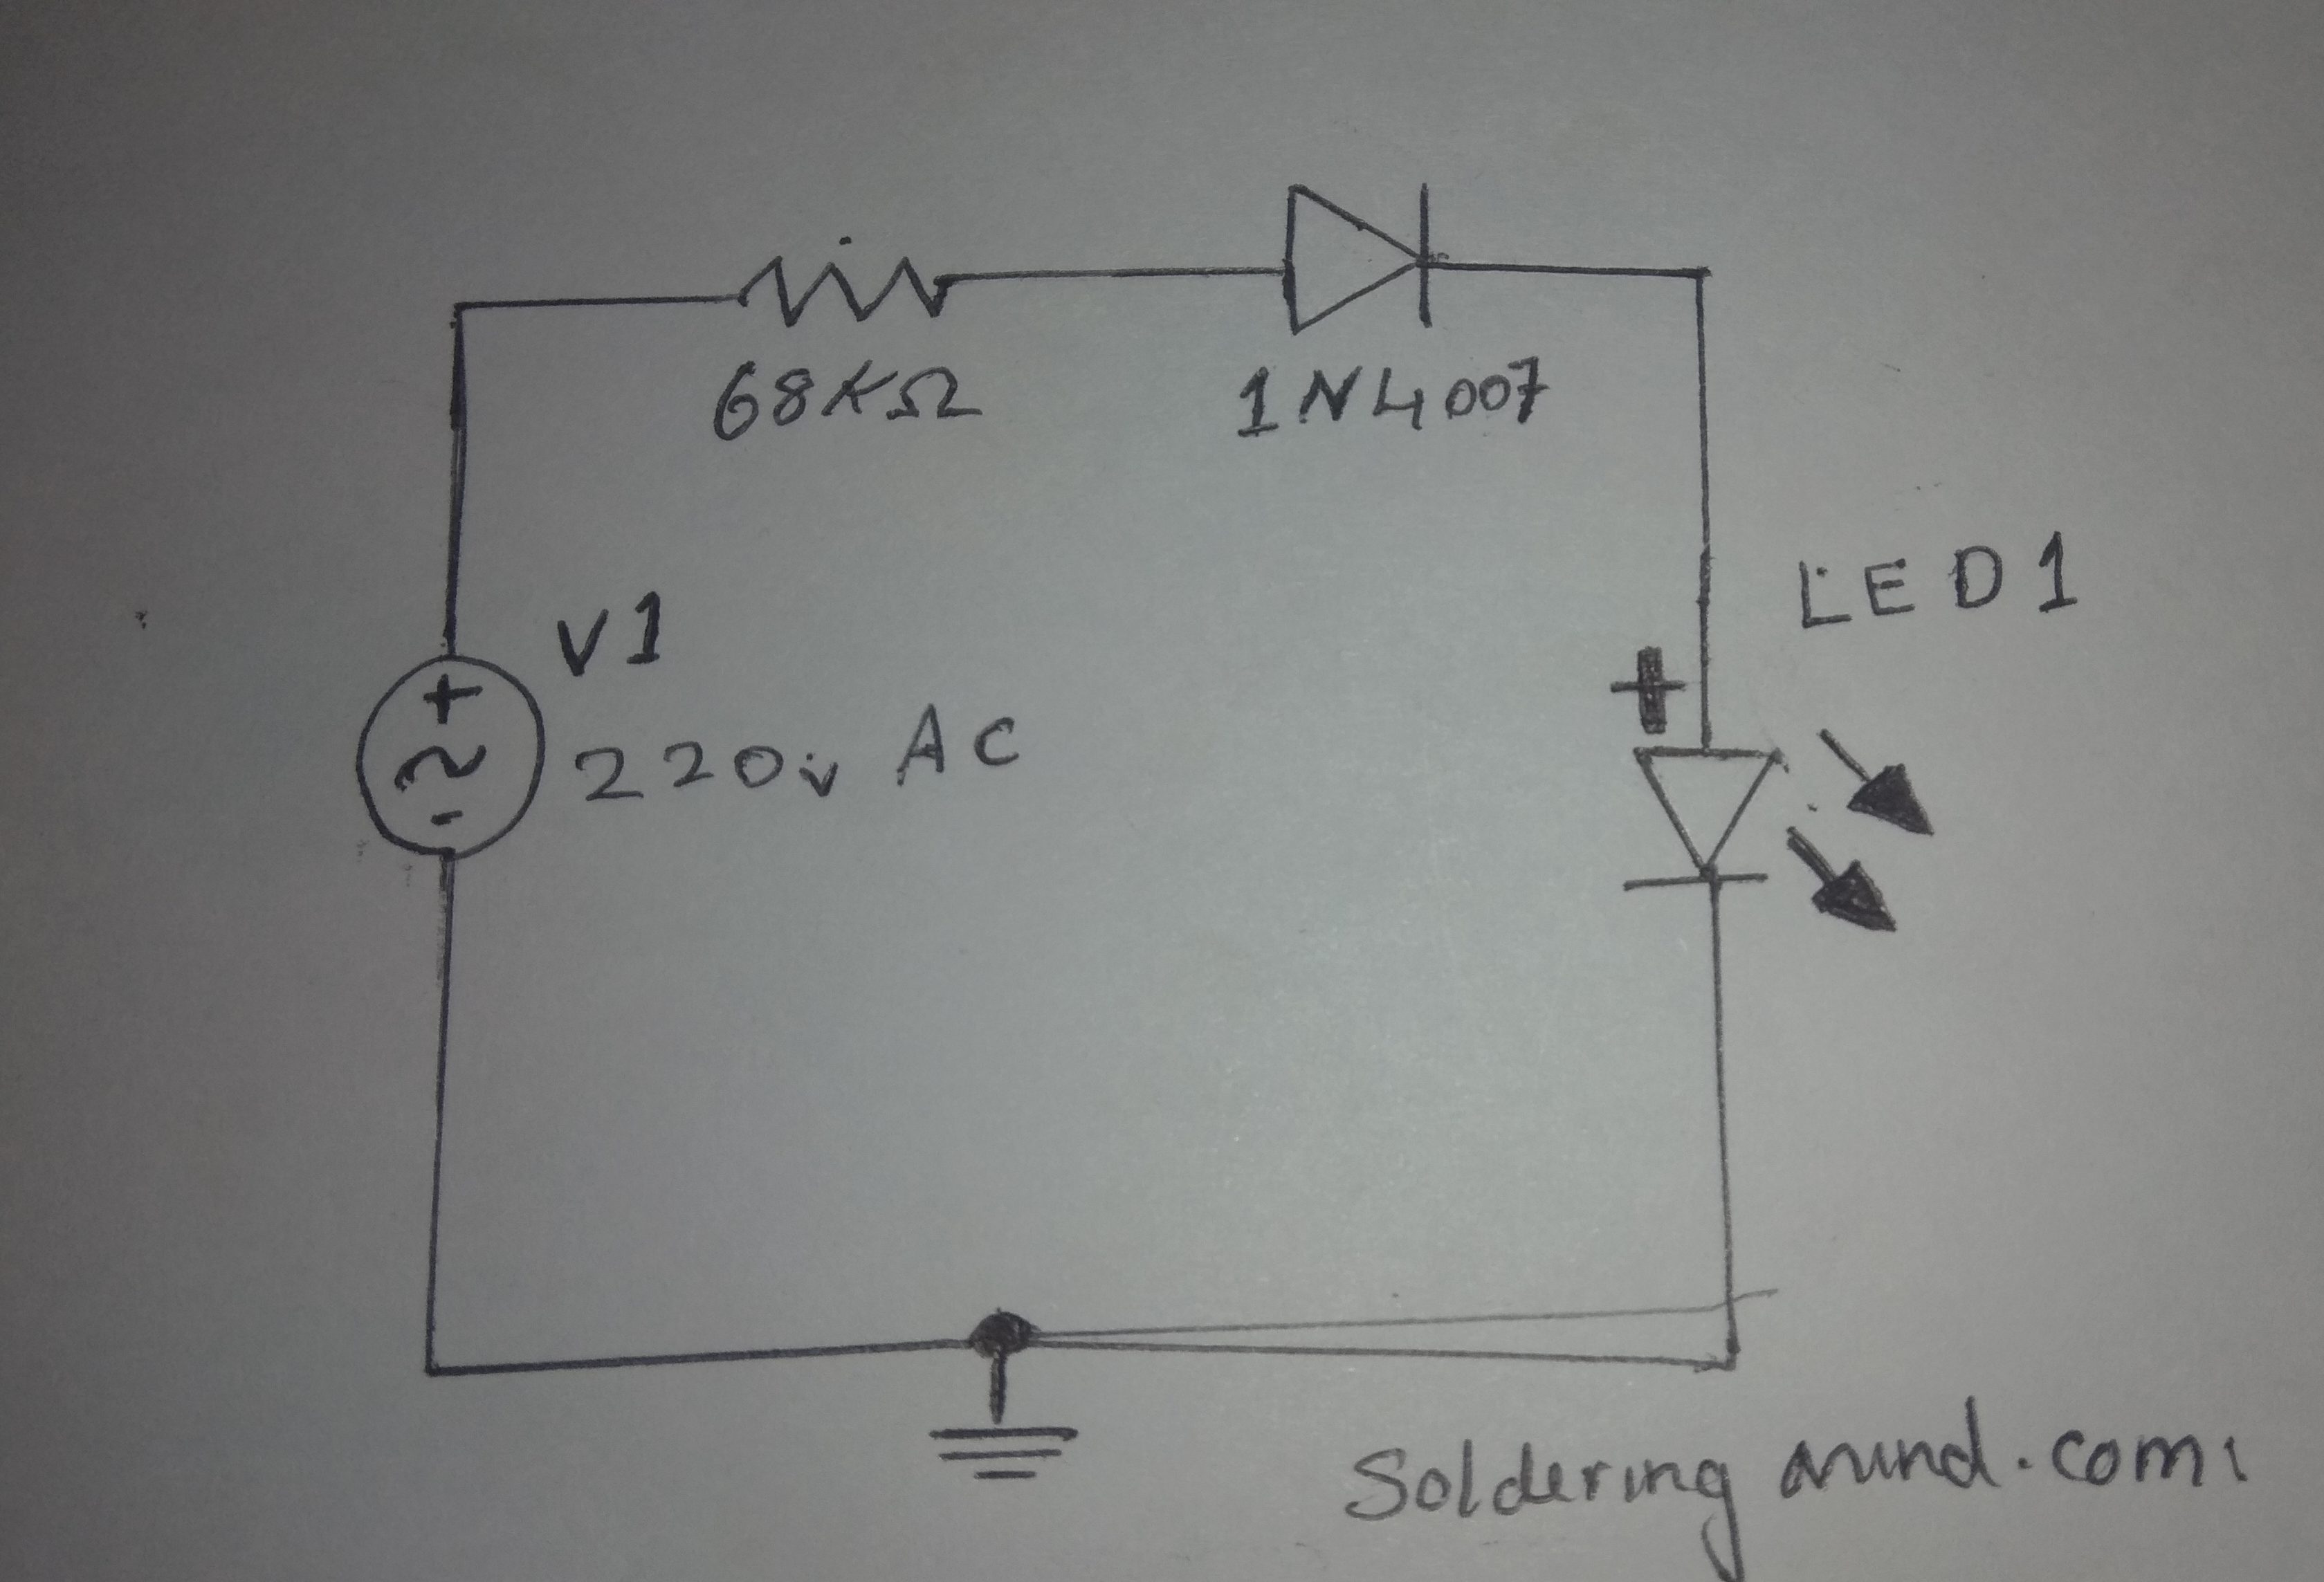 Bevidst miles Ups Current limiting resistor: Glow LED from 230v AC - Hobby circuits